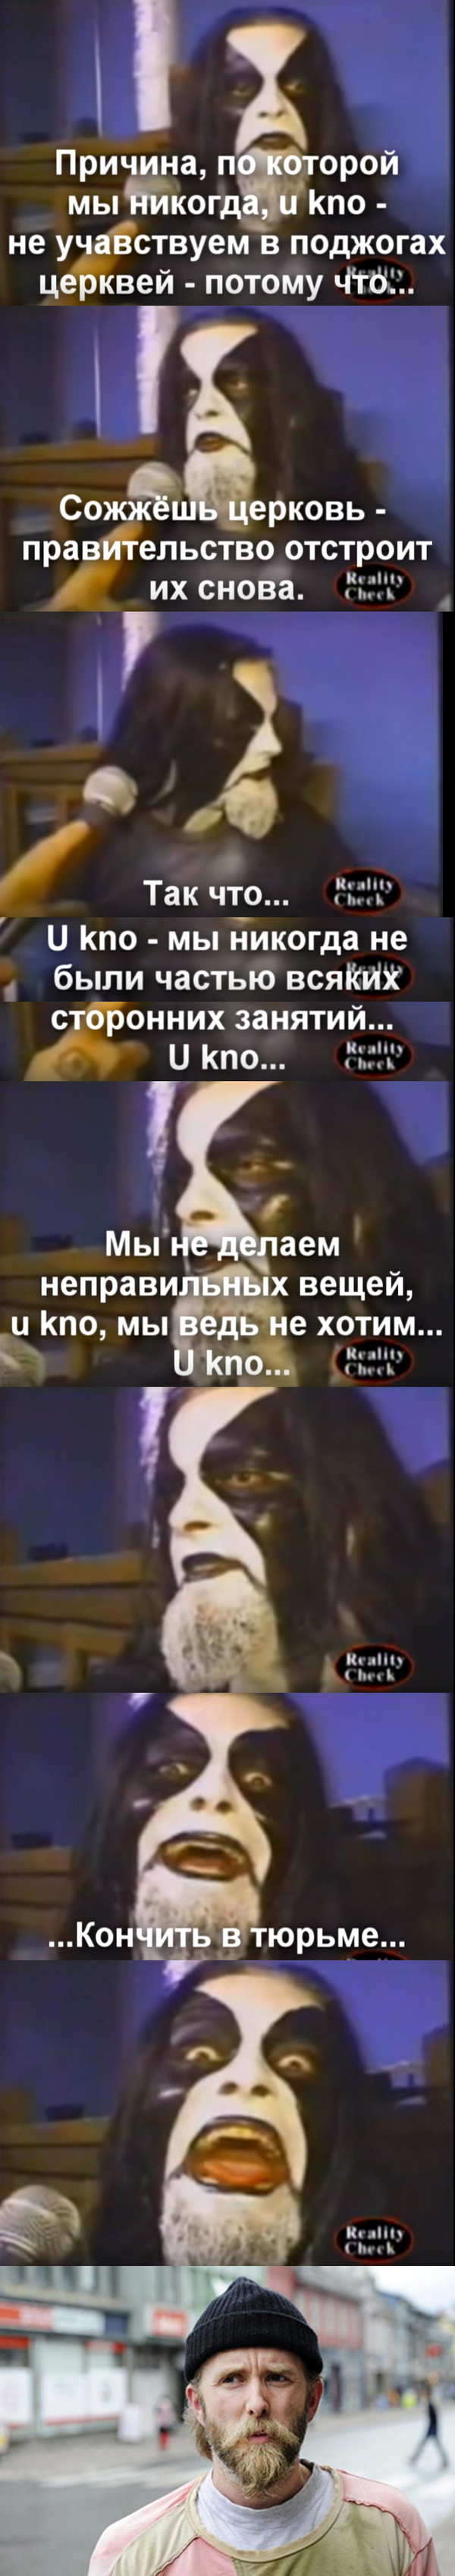 Interview with Abbath - vocalist of the band Immortal - Music, Varg Vikernes, Metal, Longpost, Interview, Storyboard, Abbath, Immortal (black metal band), Metal, Black metal